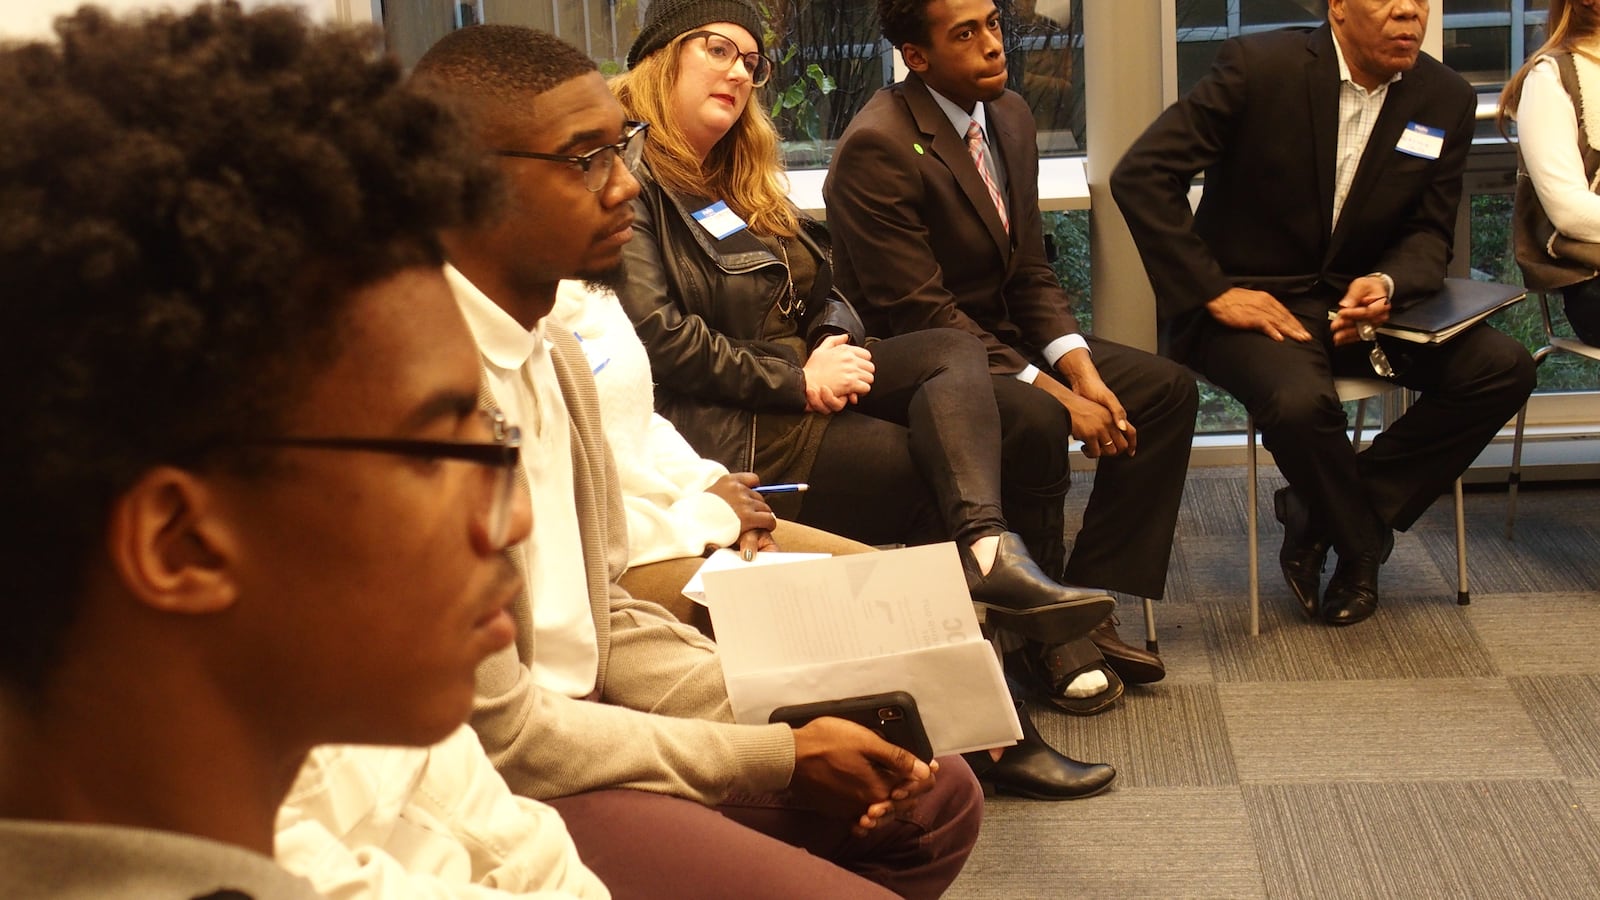 Students and community members listen during a small group discussion at BRIDGES' Youth Action Networking Day on Dec. 15.